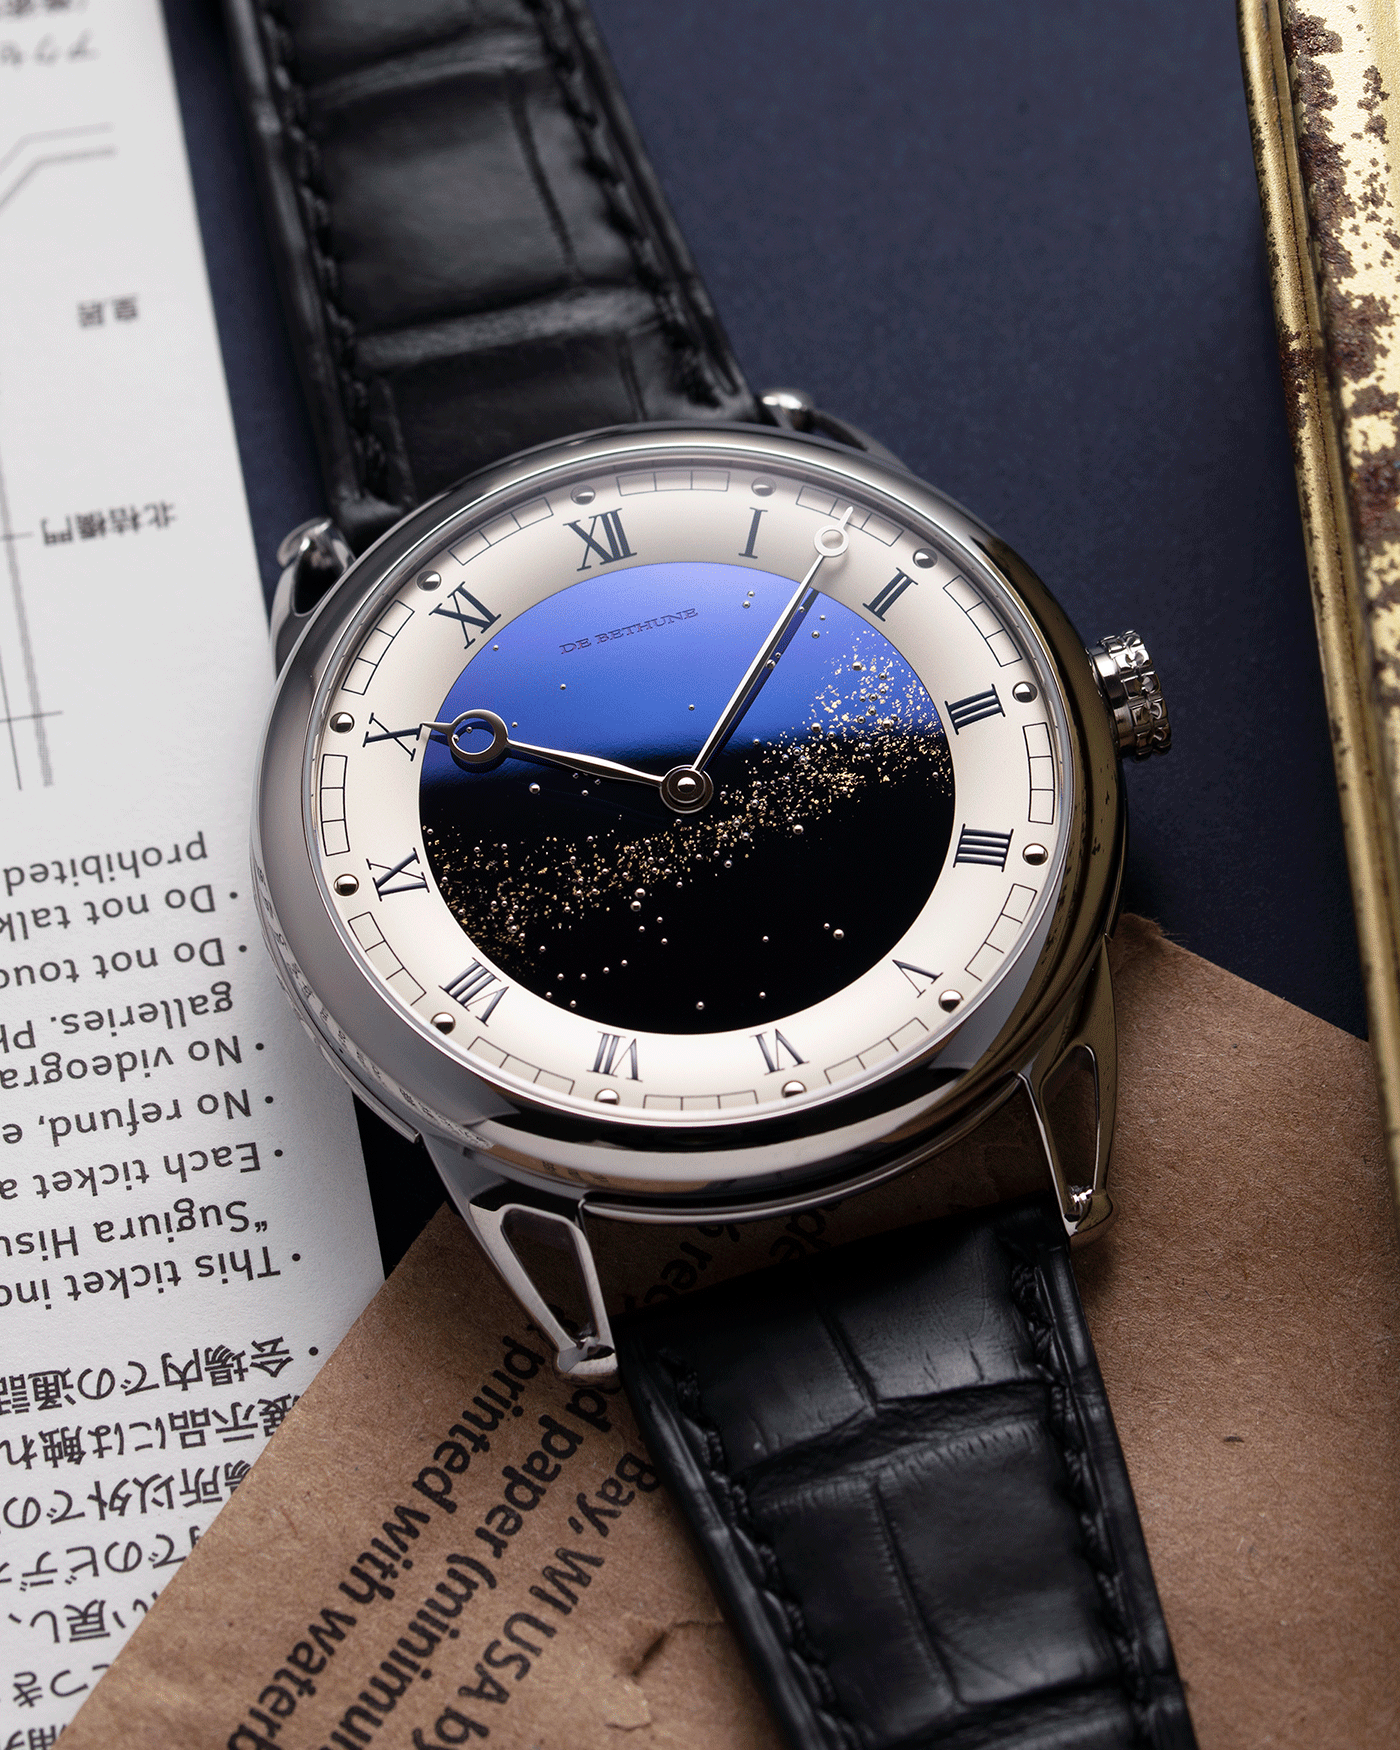 Brand: De Bethune Year: 2020 Model: Starry Varius Reference: DB25 Material: Titanium Movement: In-House Cal. DB2005 Case Diameter: 42mm Strap: De Bethune Black Alligator with Titanium Tang Buckle